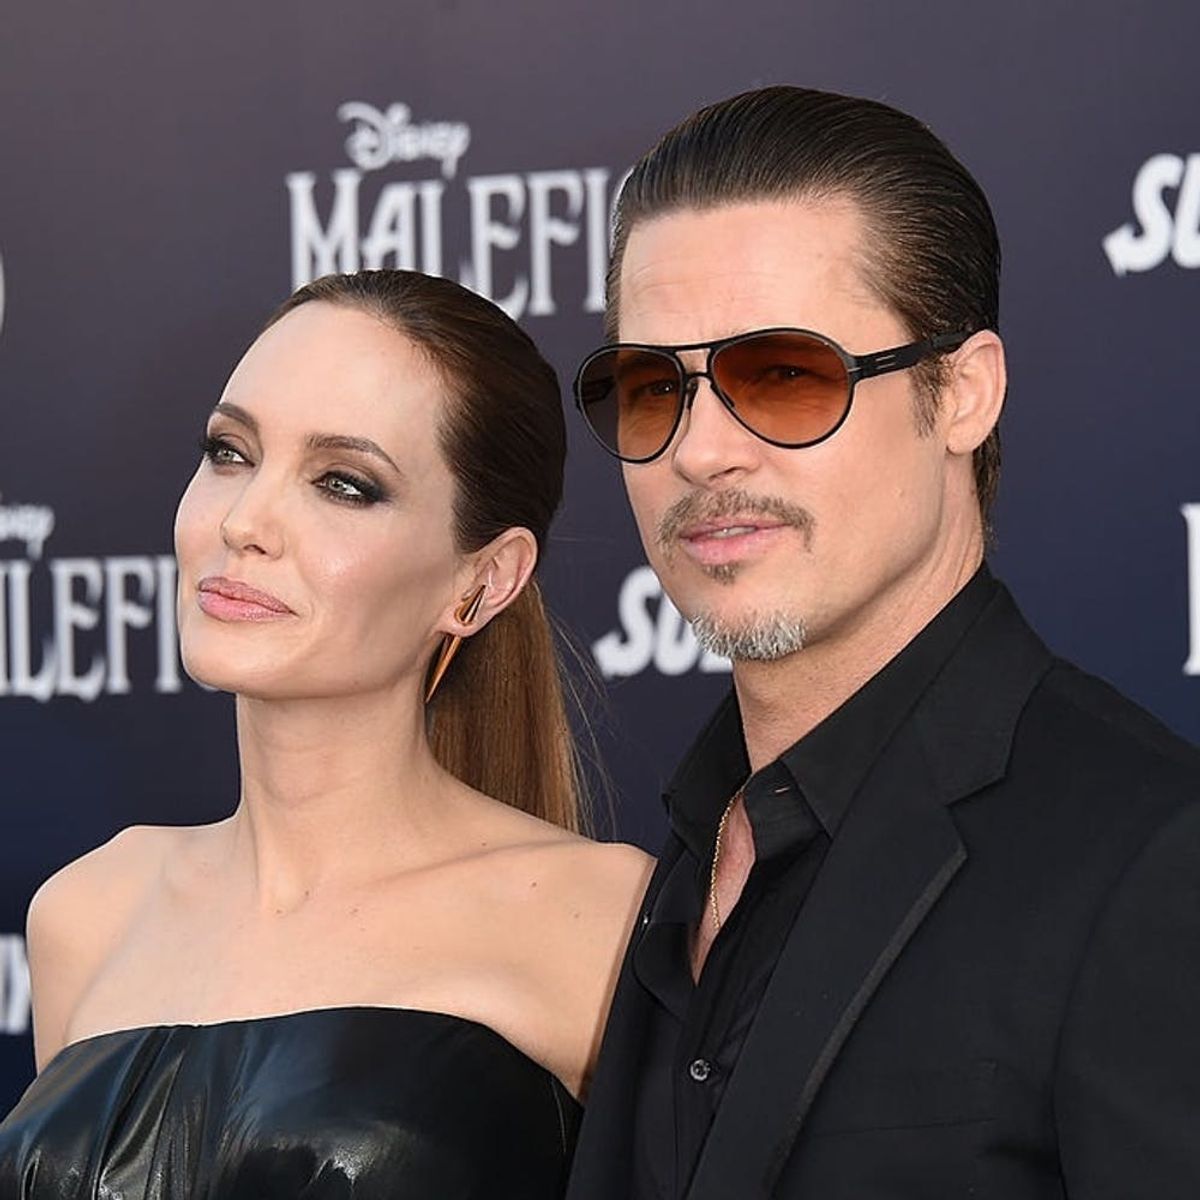 We’re Not Over It Yet Either: An Expert on Why Brangelina Broke Up